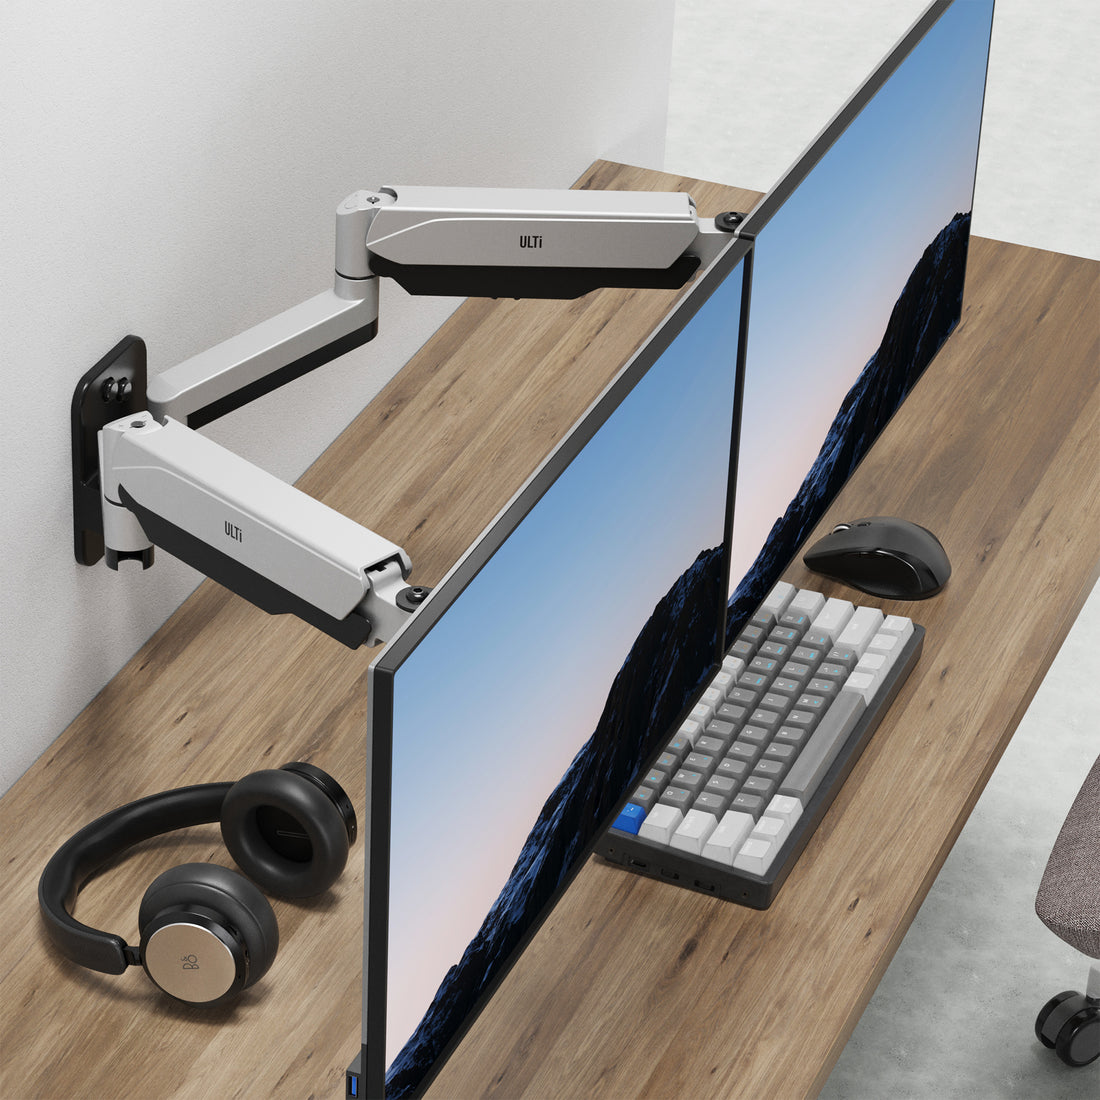 Stealth Dual Wall-Mounted Monitor Arm | T11